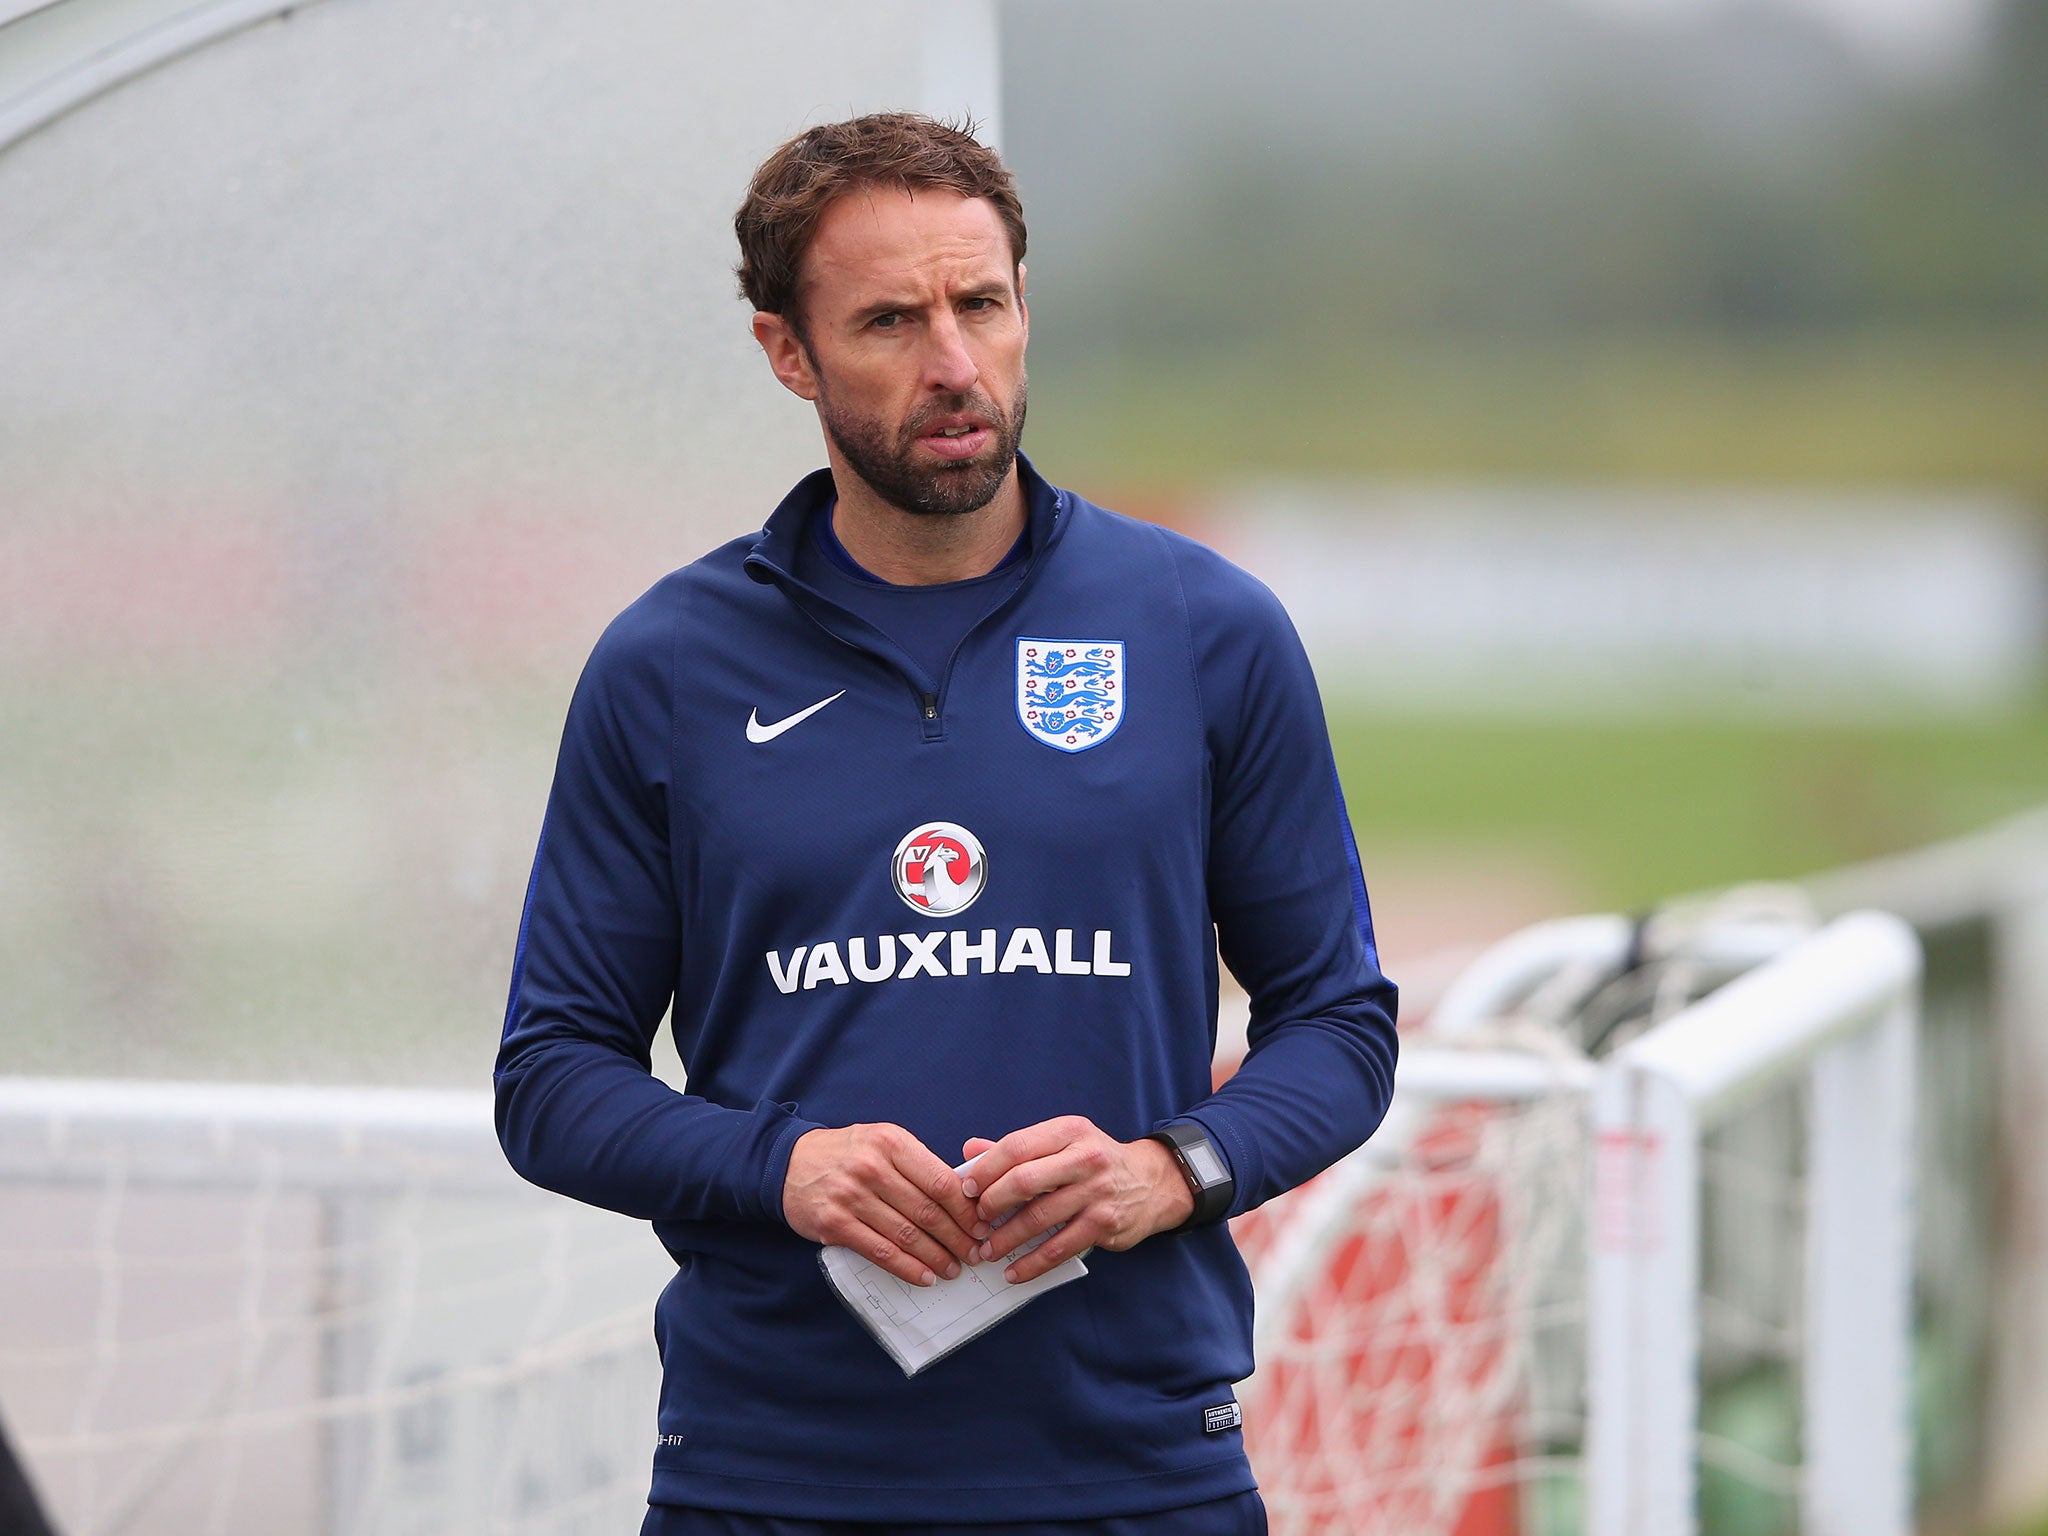 Southgate as U21 manager prior to his appointment to the senior role